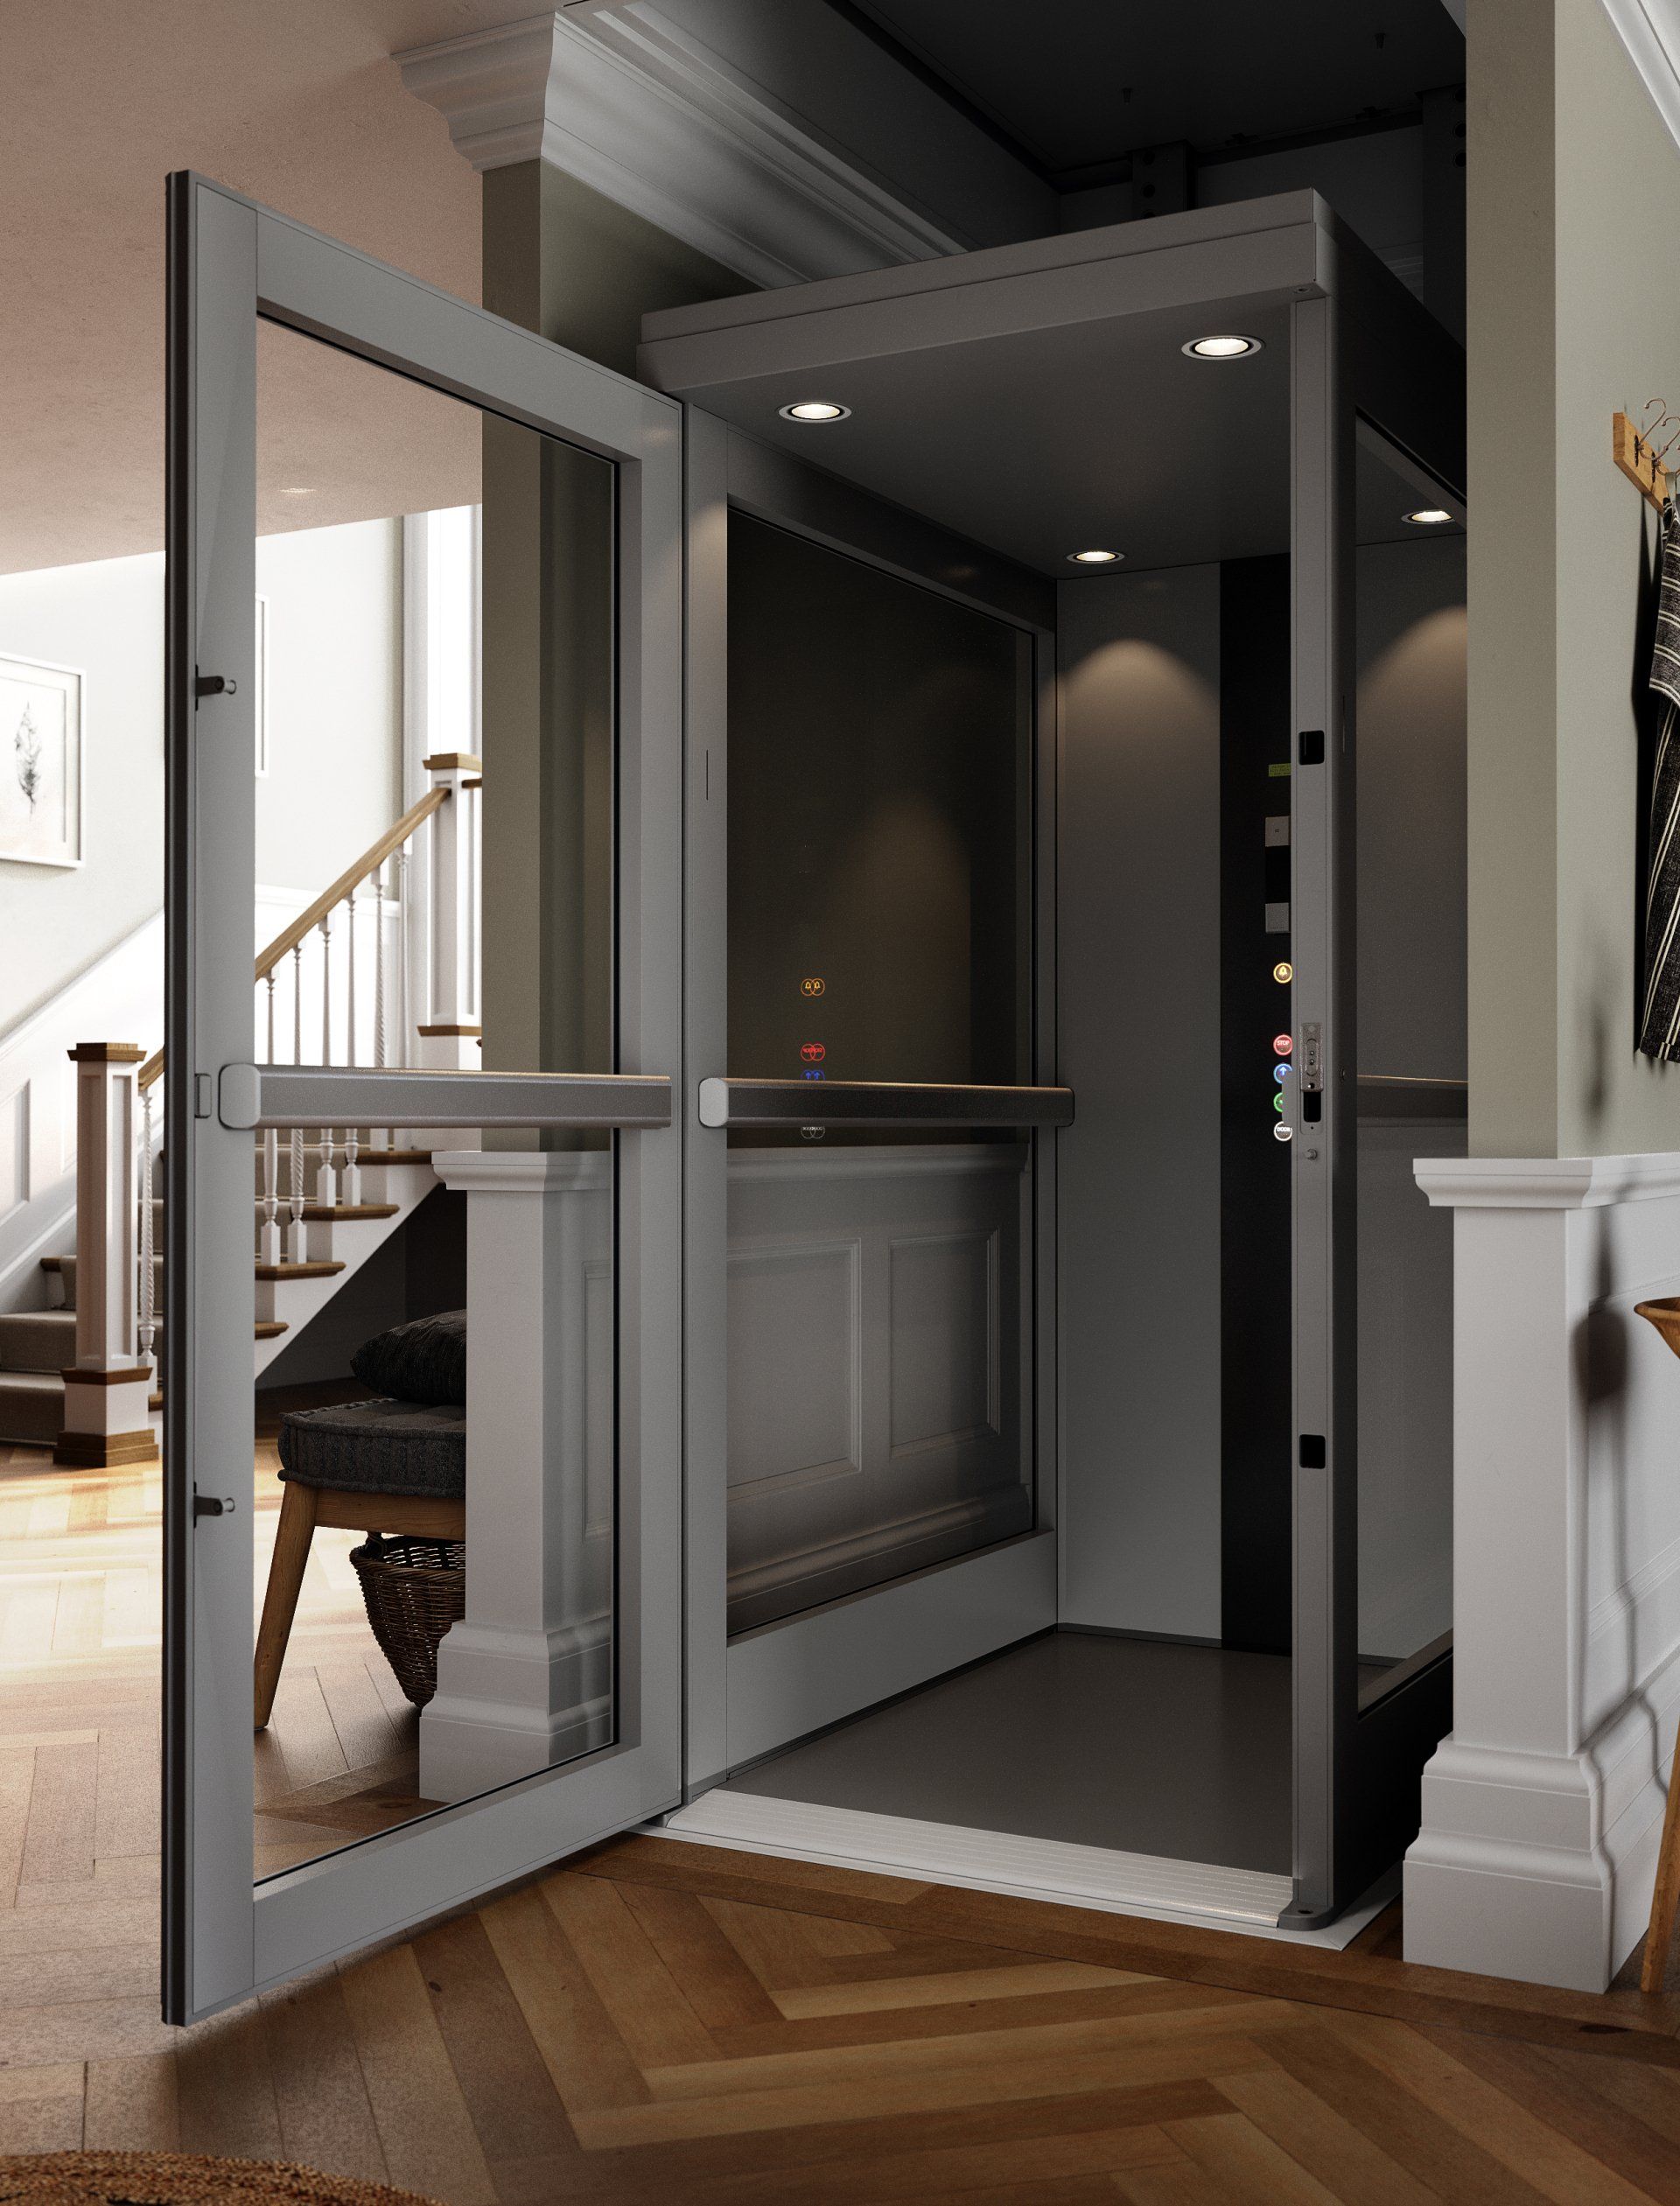 Do I need planning permission for a home lift in the uk?